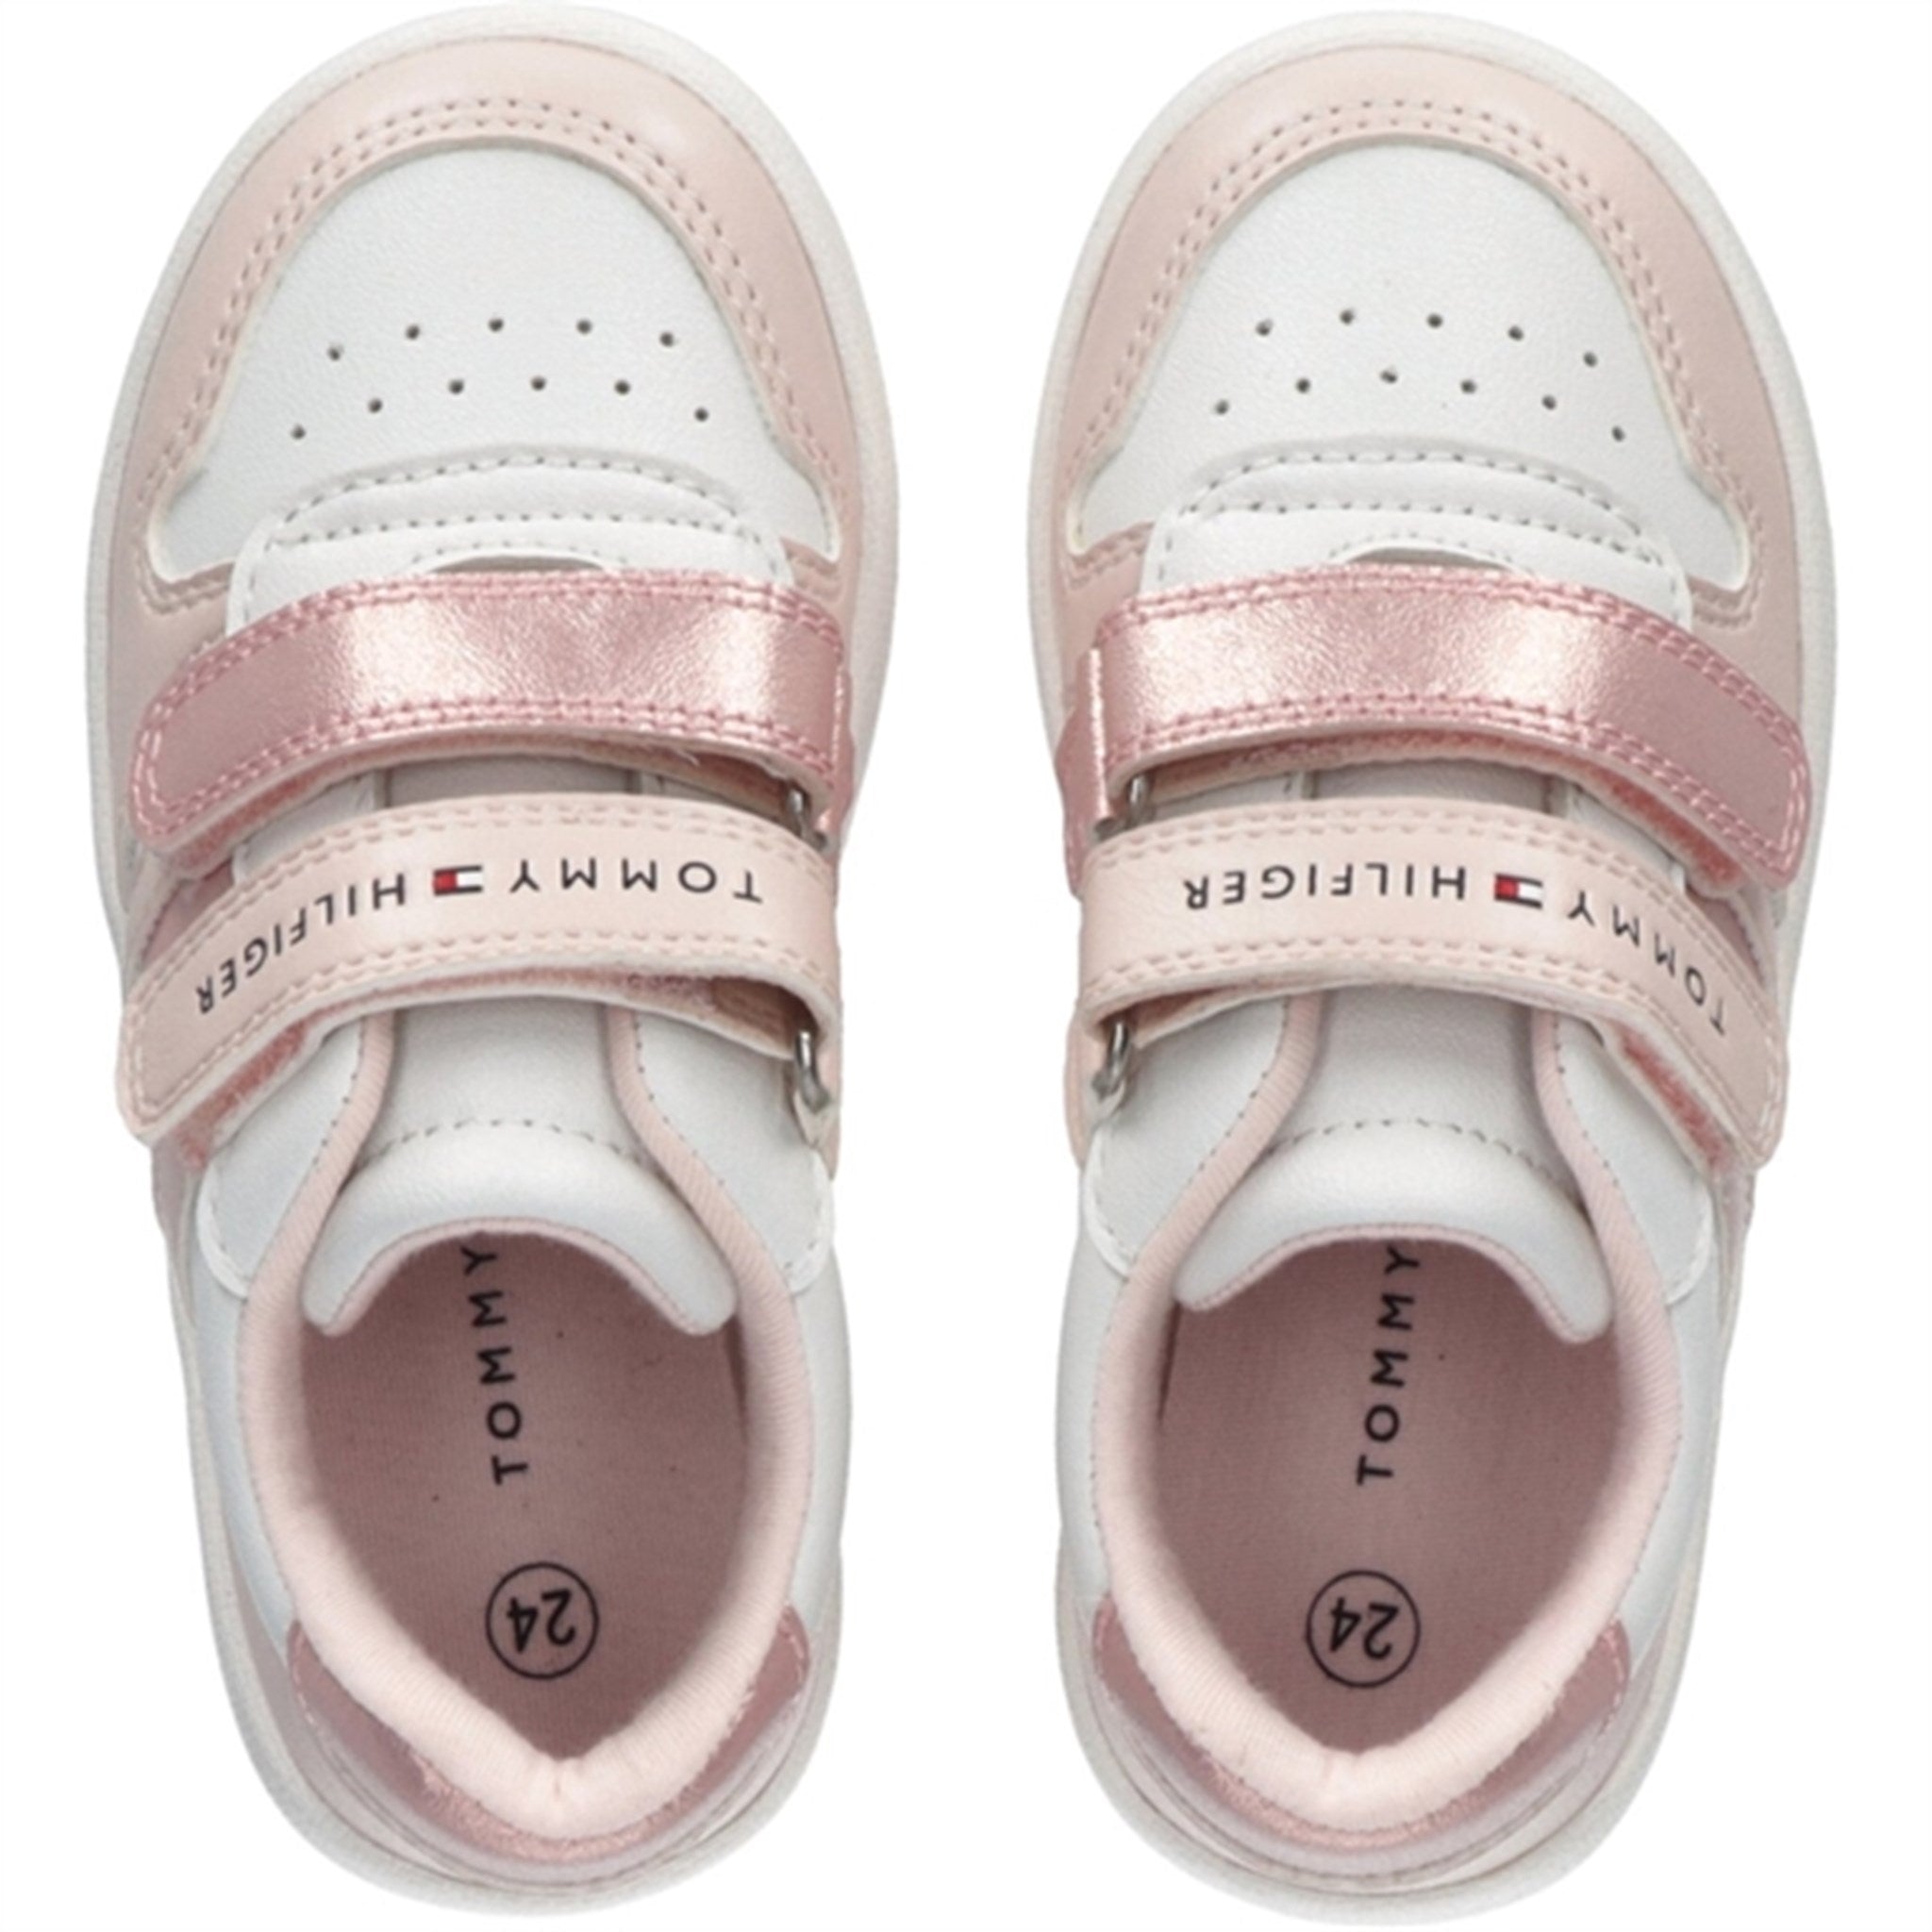 Tommy Hilfiger Low Cut Velcro Sneakers Pink/White